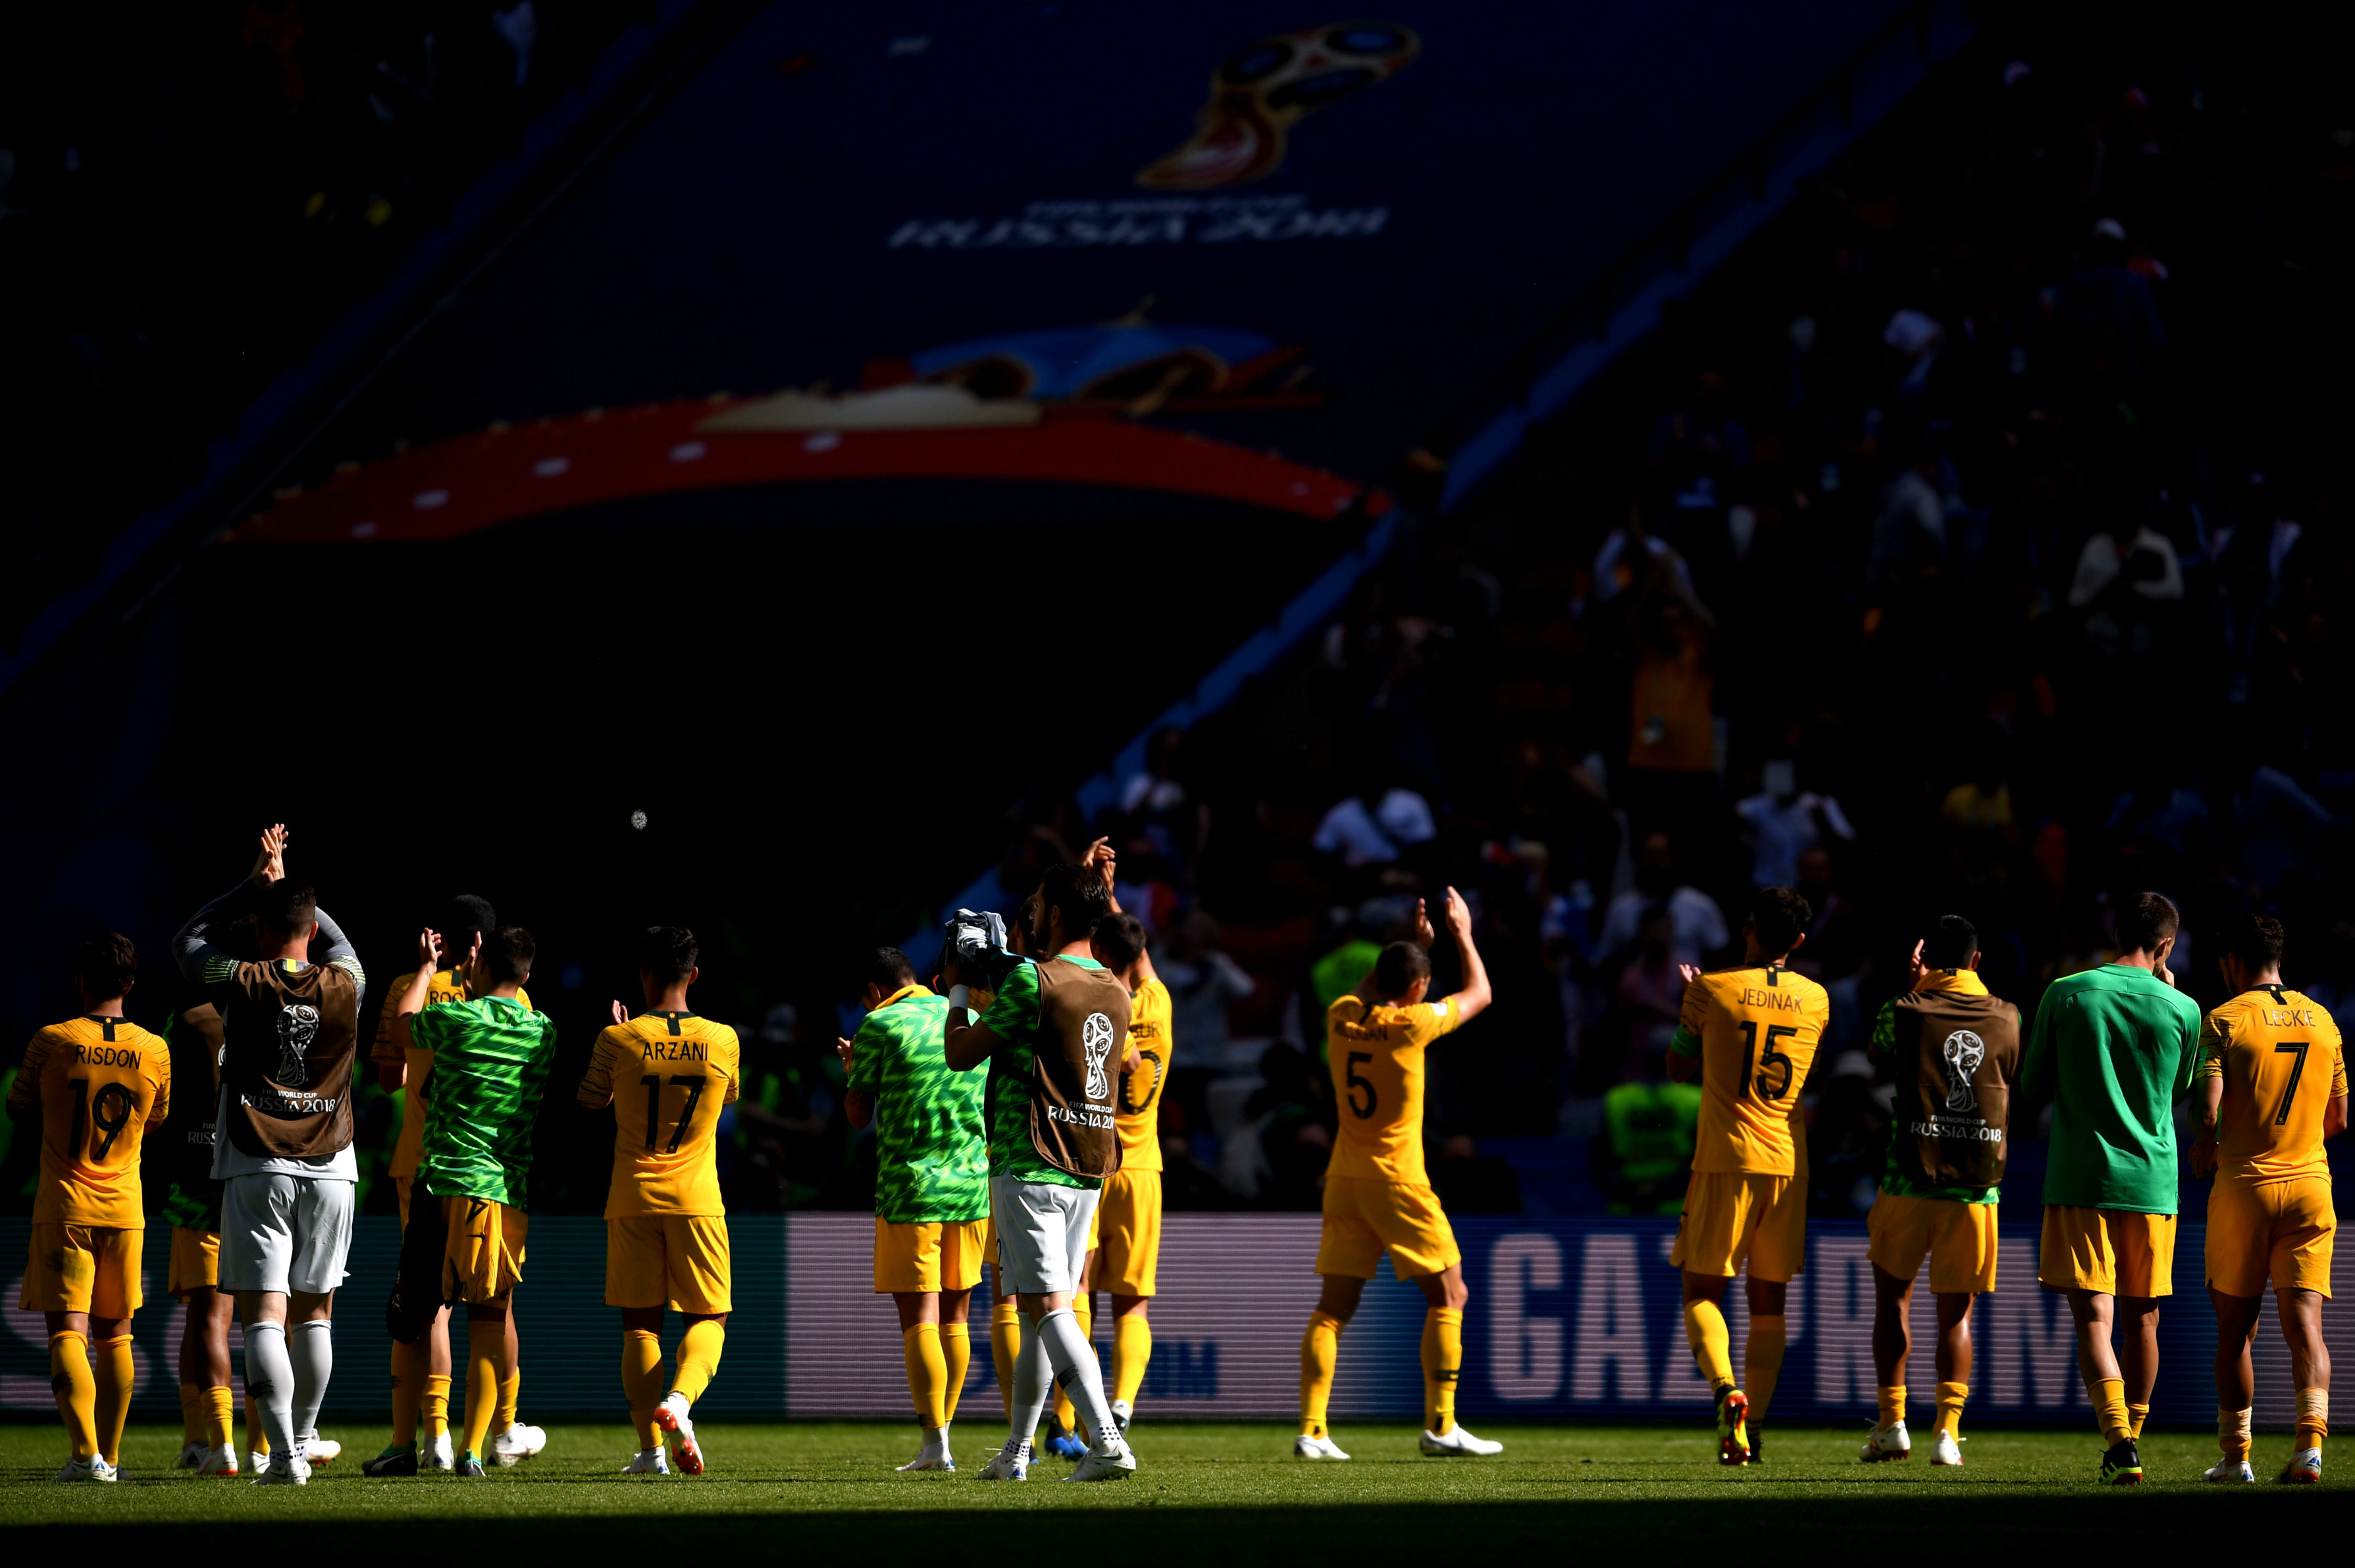 Socceroos players thank the fans for their support inside the Kazan Arena.